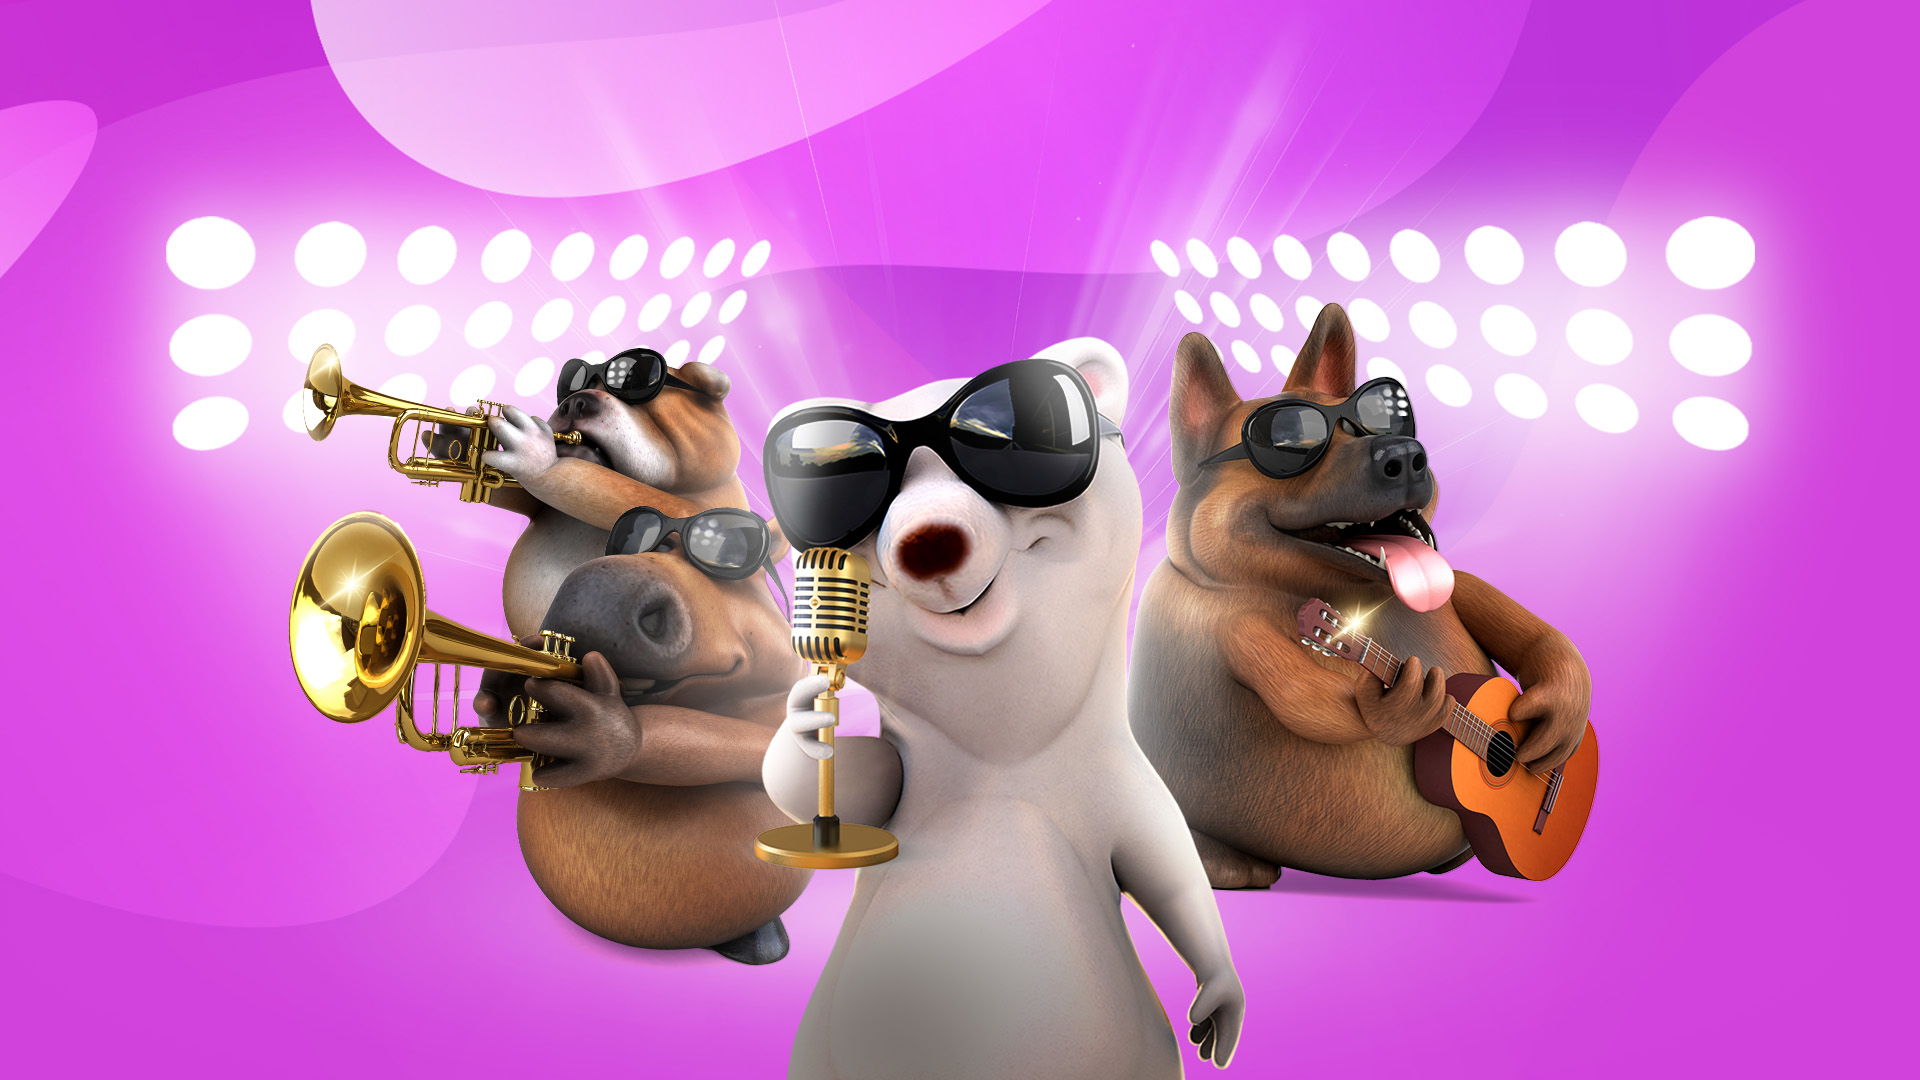 3D cartoon animals, from SlotsLV slots games, stand holding musical instruments on a pink background.